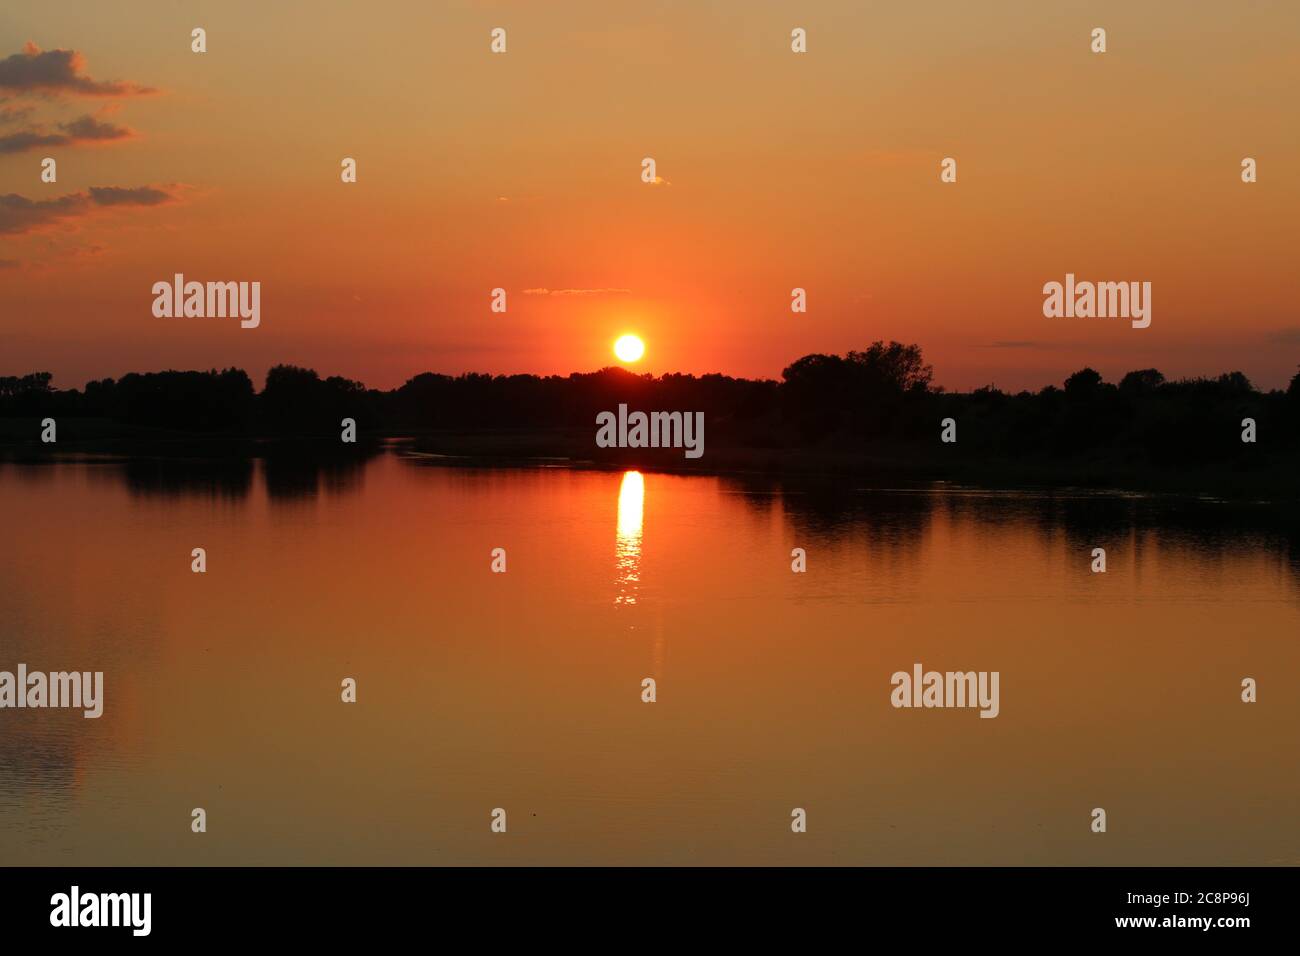 A sunset at a lake with trees on the bank of the lake Stock Photo